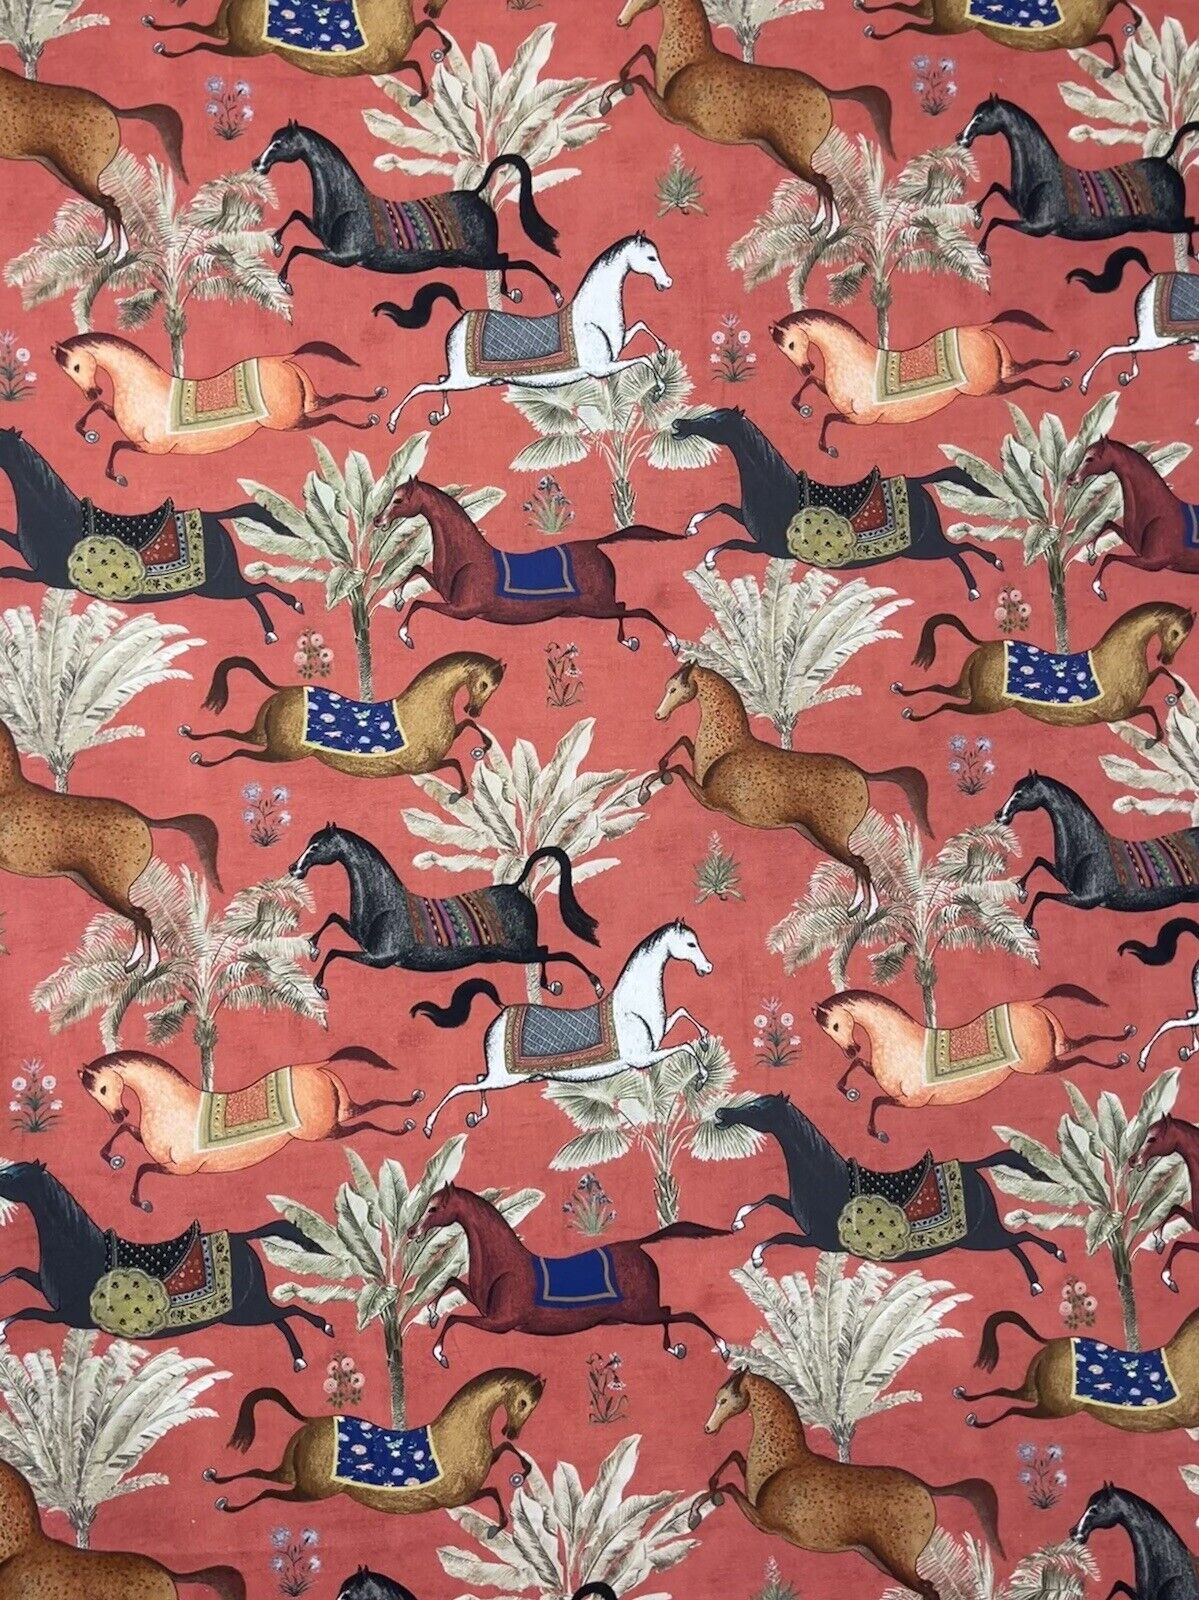 Arabian Horses Rusty Red Printed Cotton Fabric - Sold by Meter